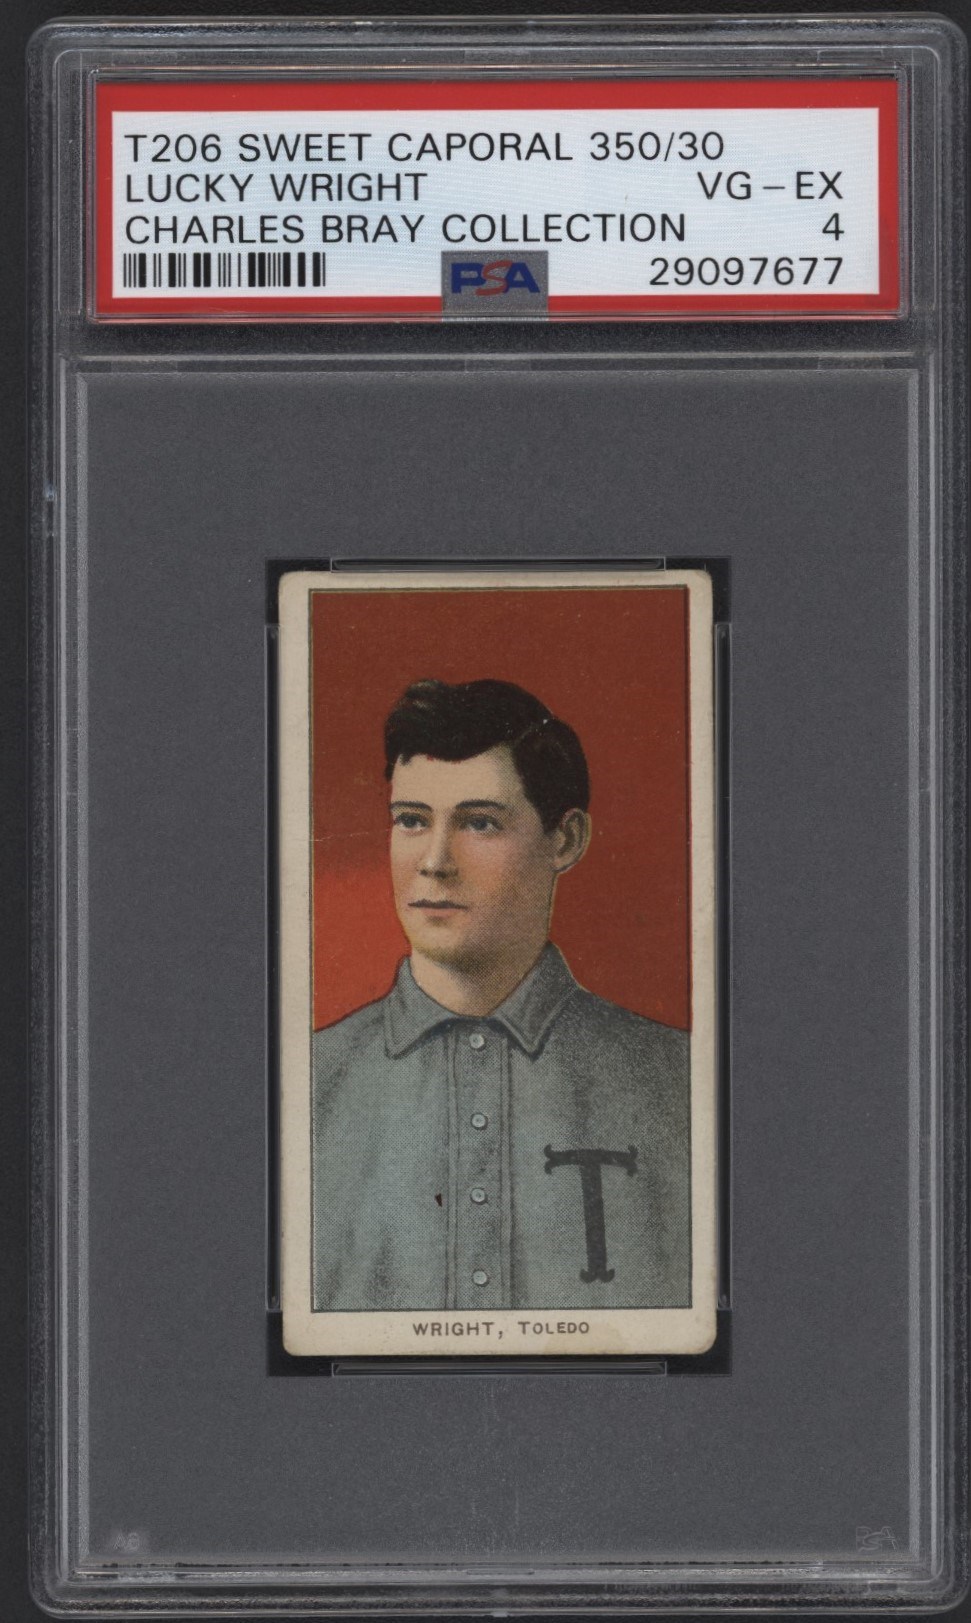 T206 Sweet Caporal 350/30 Lucky Wright PSA 4 From the Charles Bray Collection